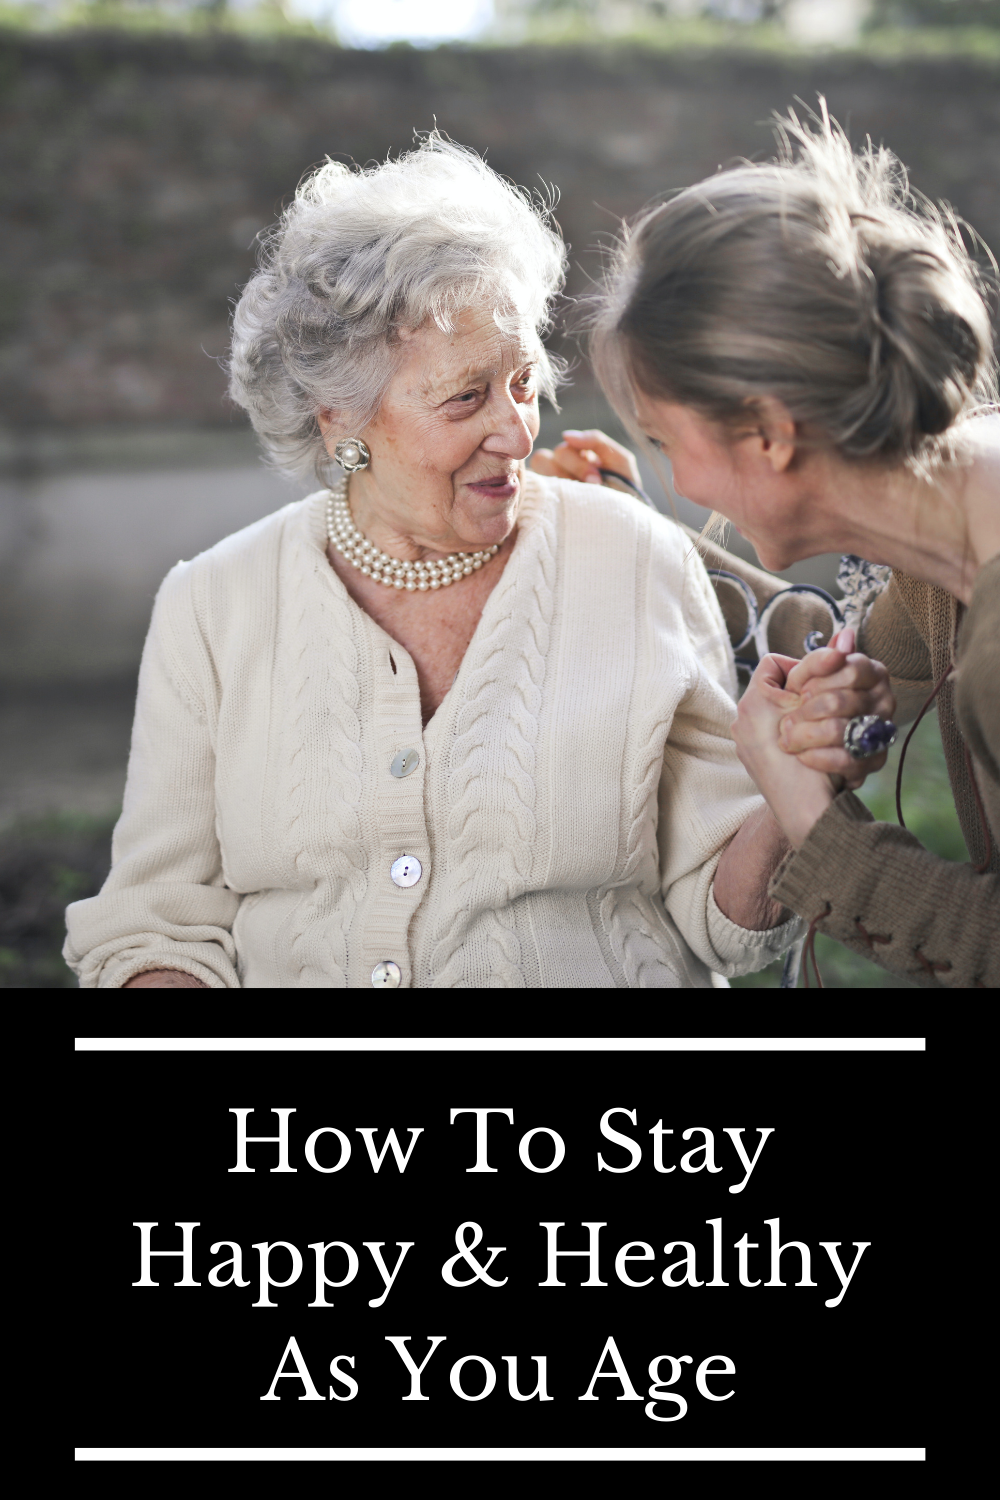 How To Stay Happy & Healthy As You Age